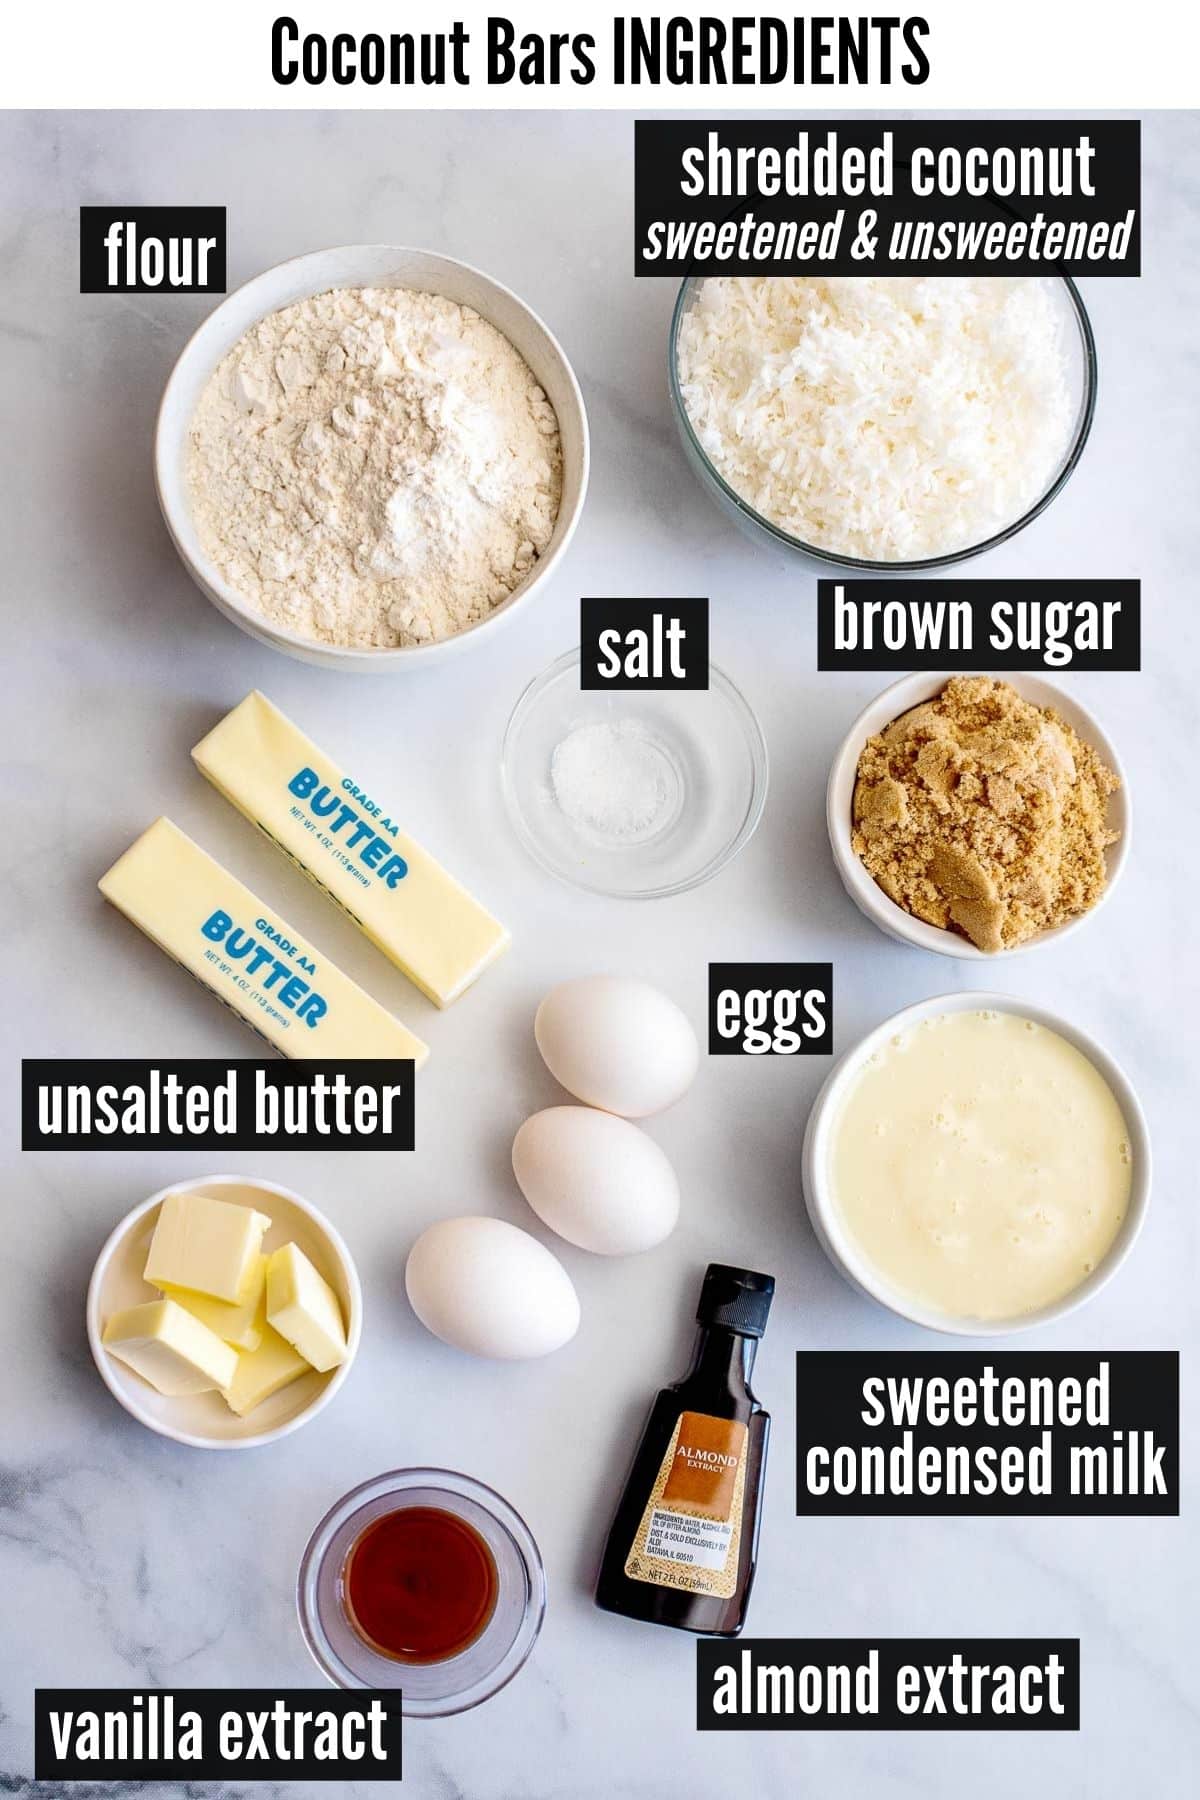 coconut bars labelled ingredients